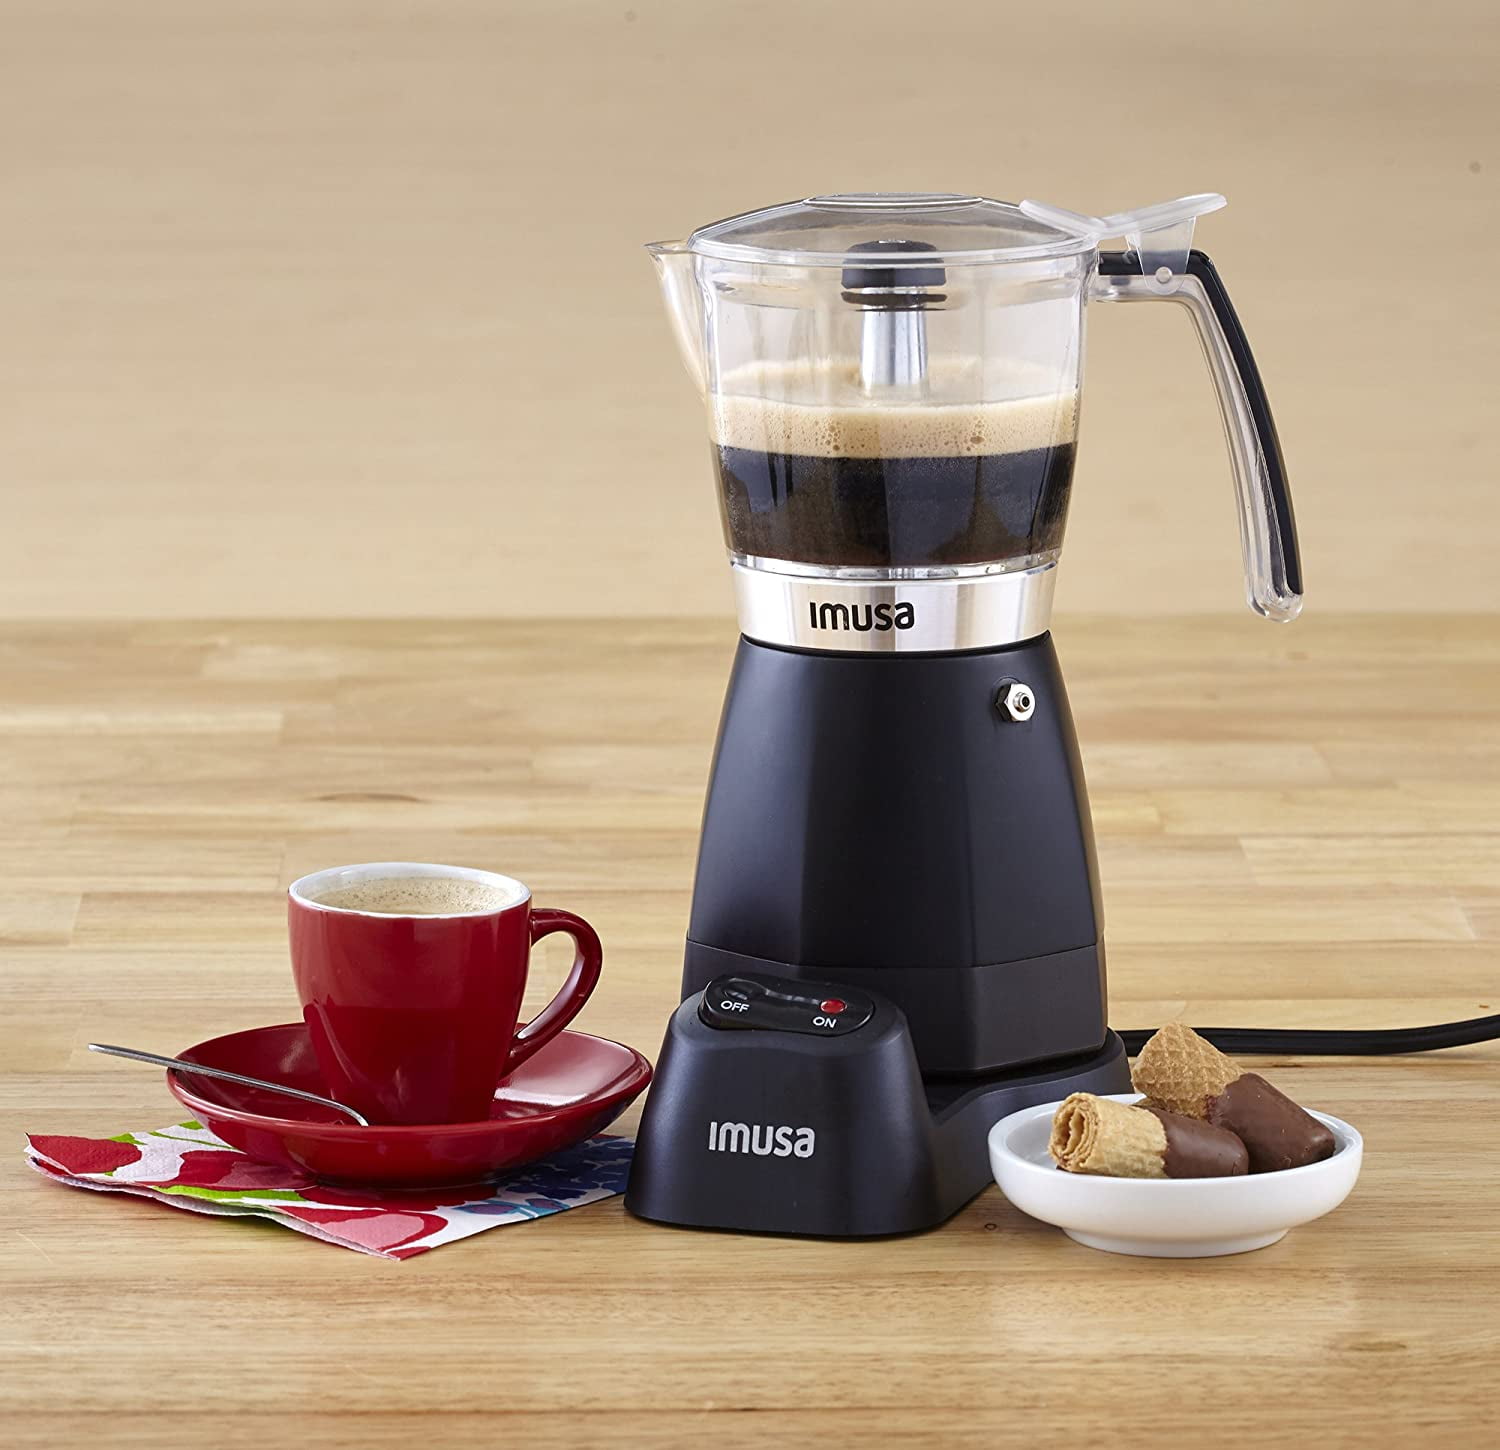 IMUSA IMUSA Electric Moka Maker 3 cup & 6 cup 480 Watts, White Speckled -  IMUSA